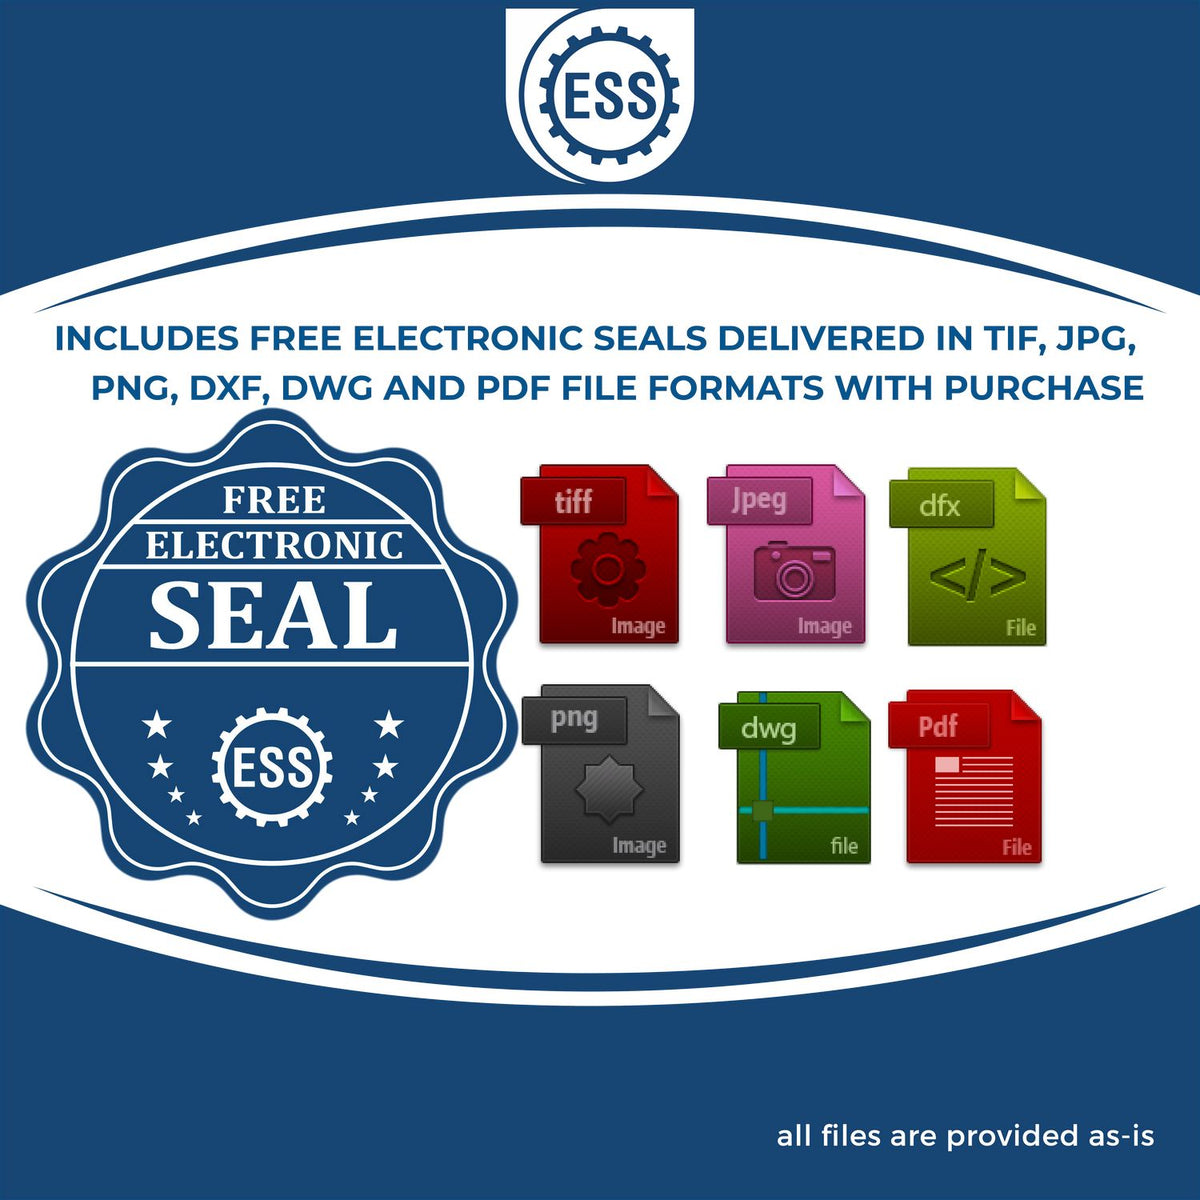 An infographic for the free electronic seal for the Gift Oklahoma Landscape Architect Seal illustrating the different file type icons such as DXF, DWG, TIF, JPG and PNG.